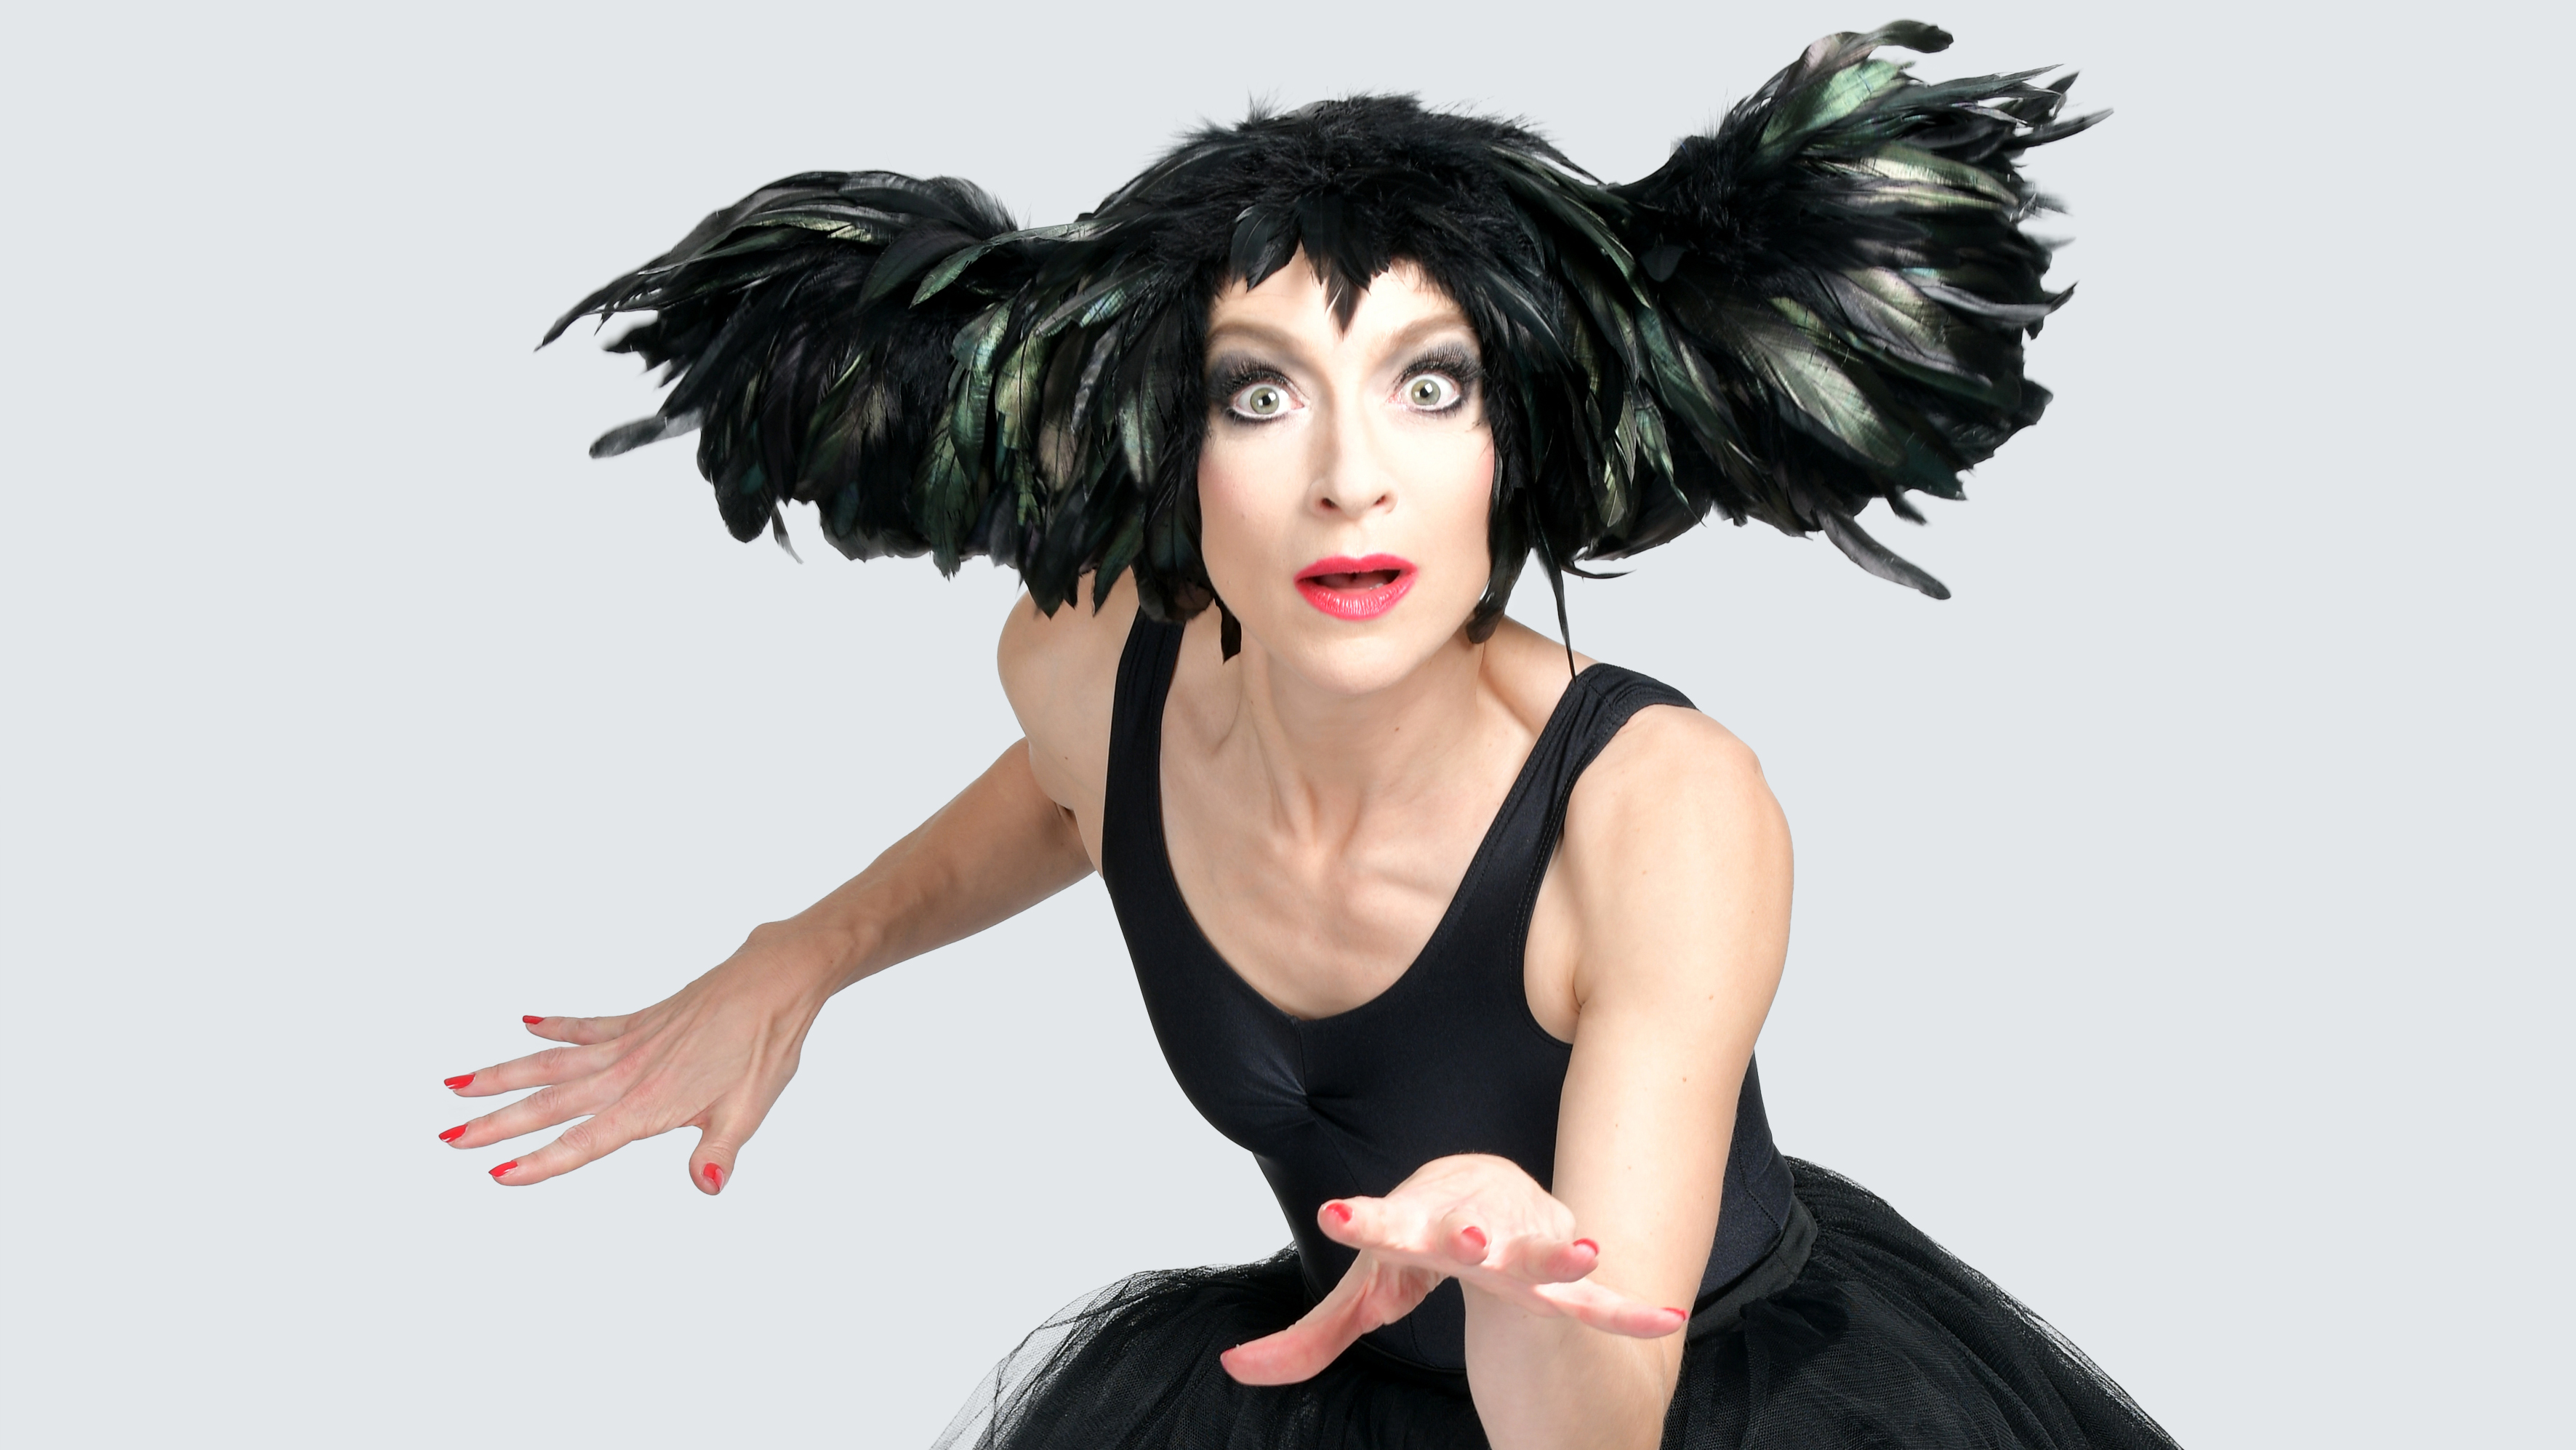 Image of woman wearing a black dress and a large black headpiece made out of feathers